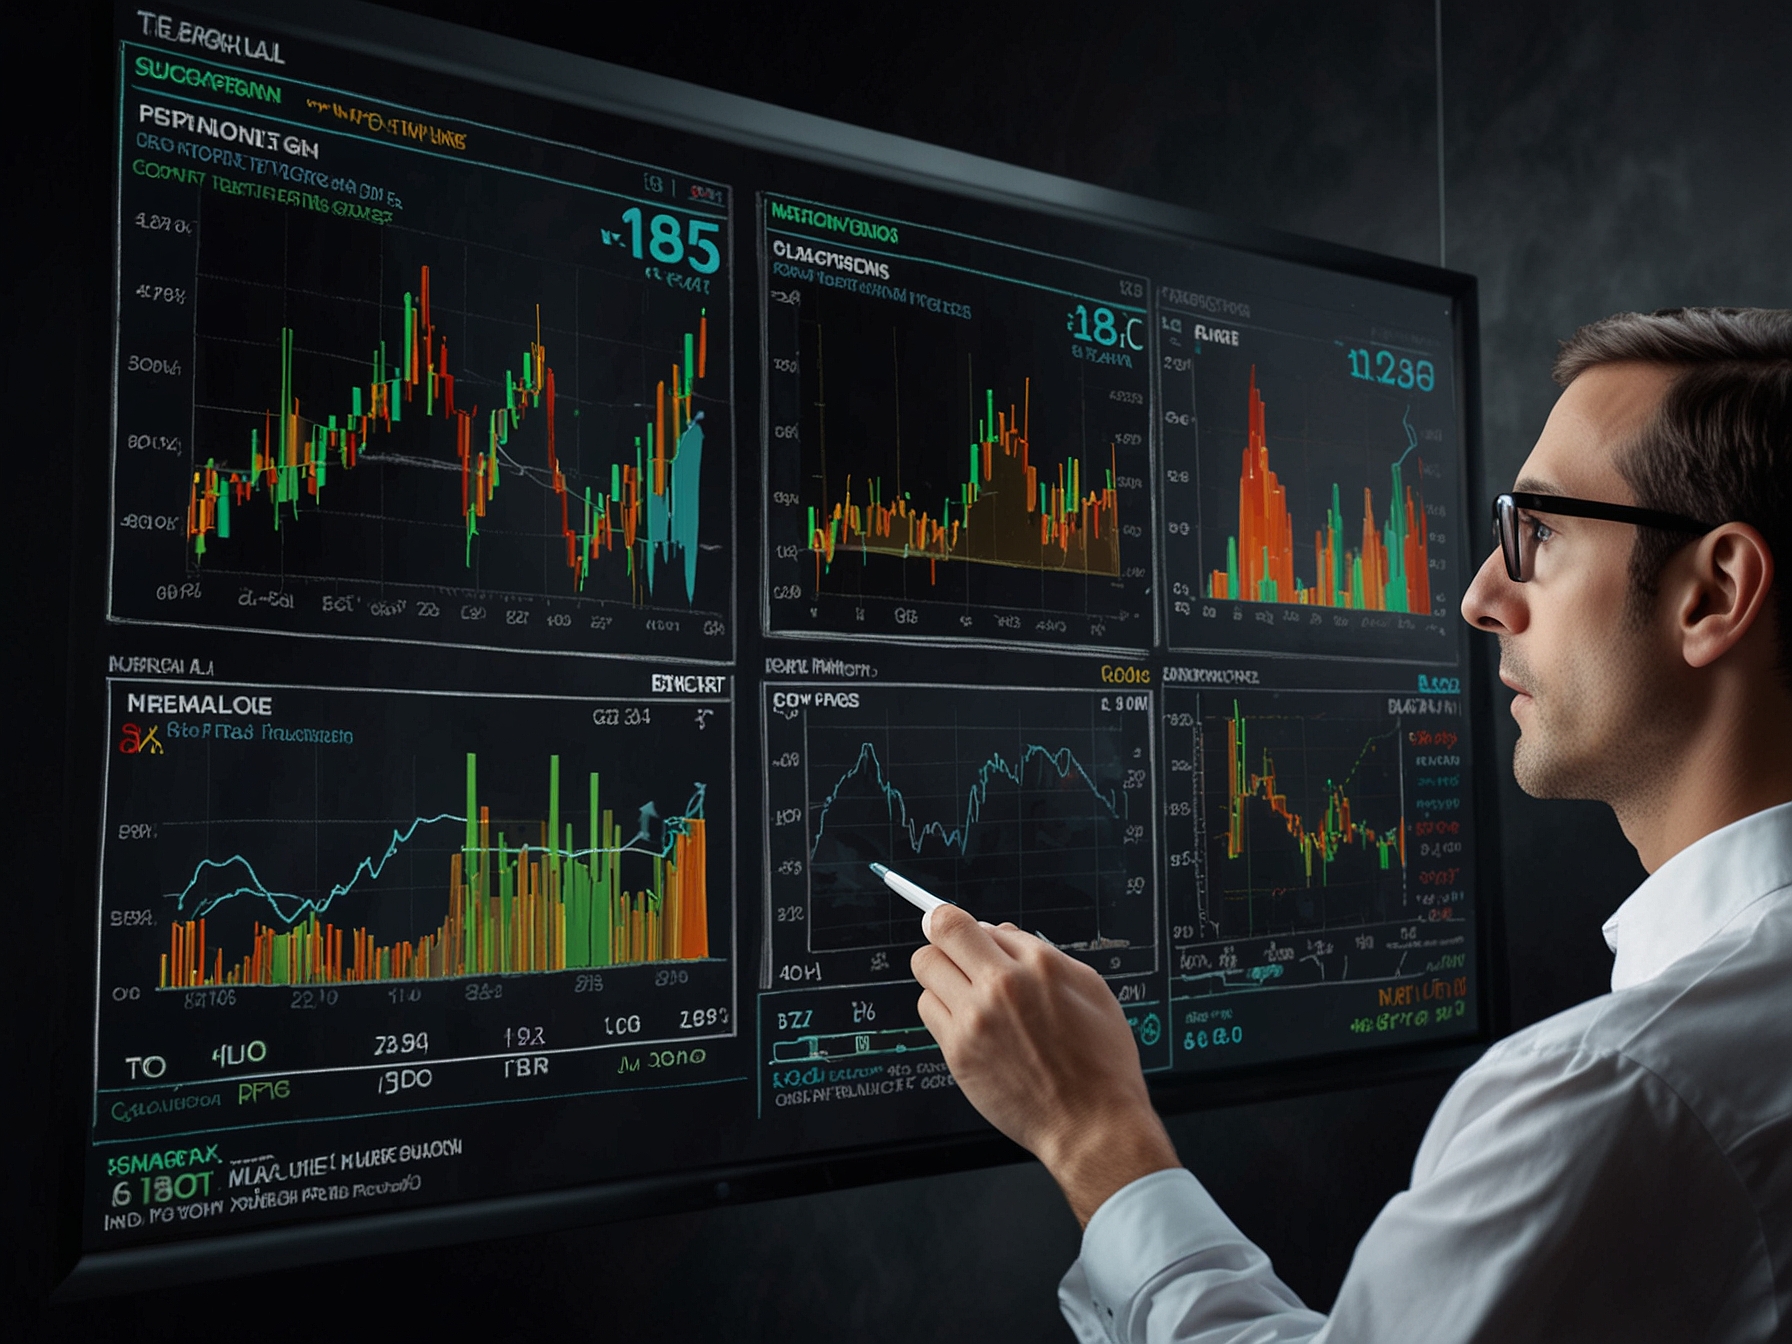 An investor analyzing financial data on a digital screen with stock charts representing the performance of NanoTech Solutions, EcoEnergy Corp., and MedTech Innovations.